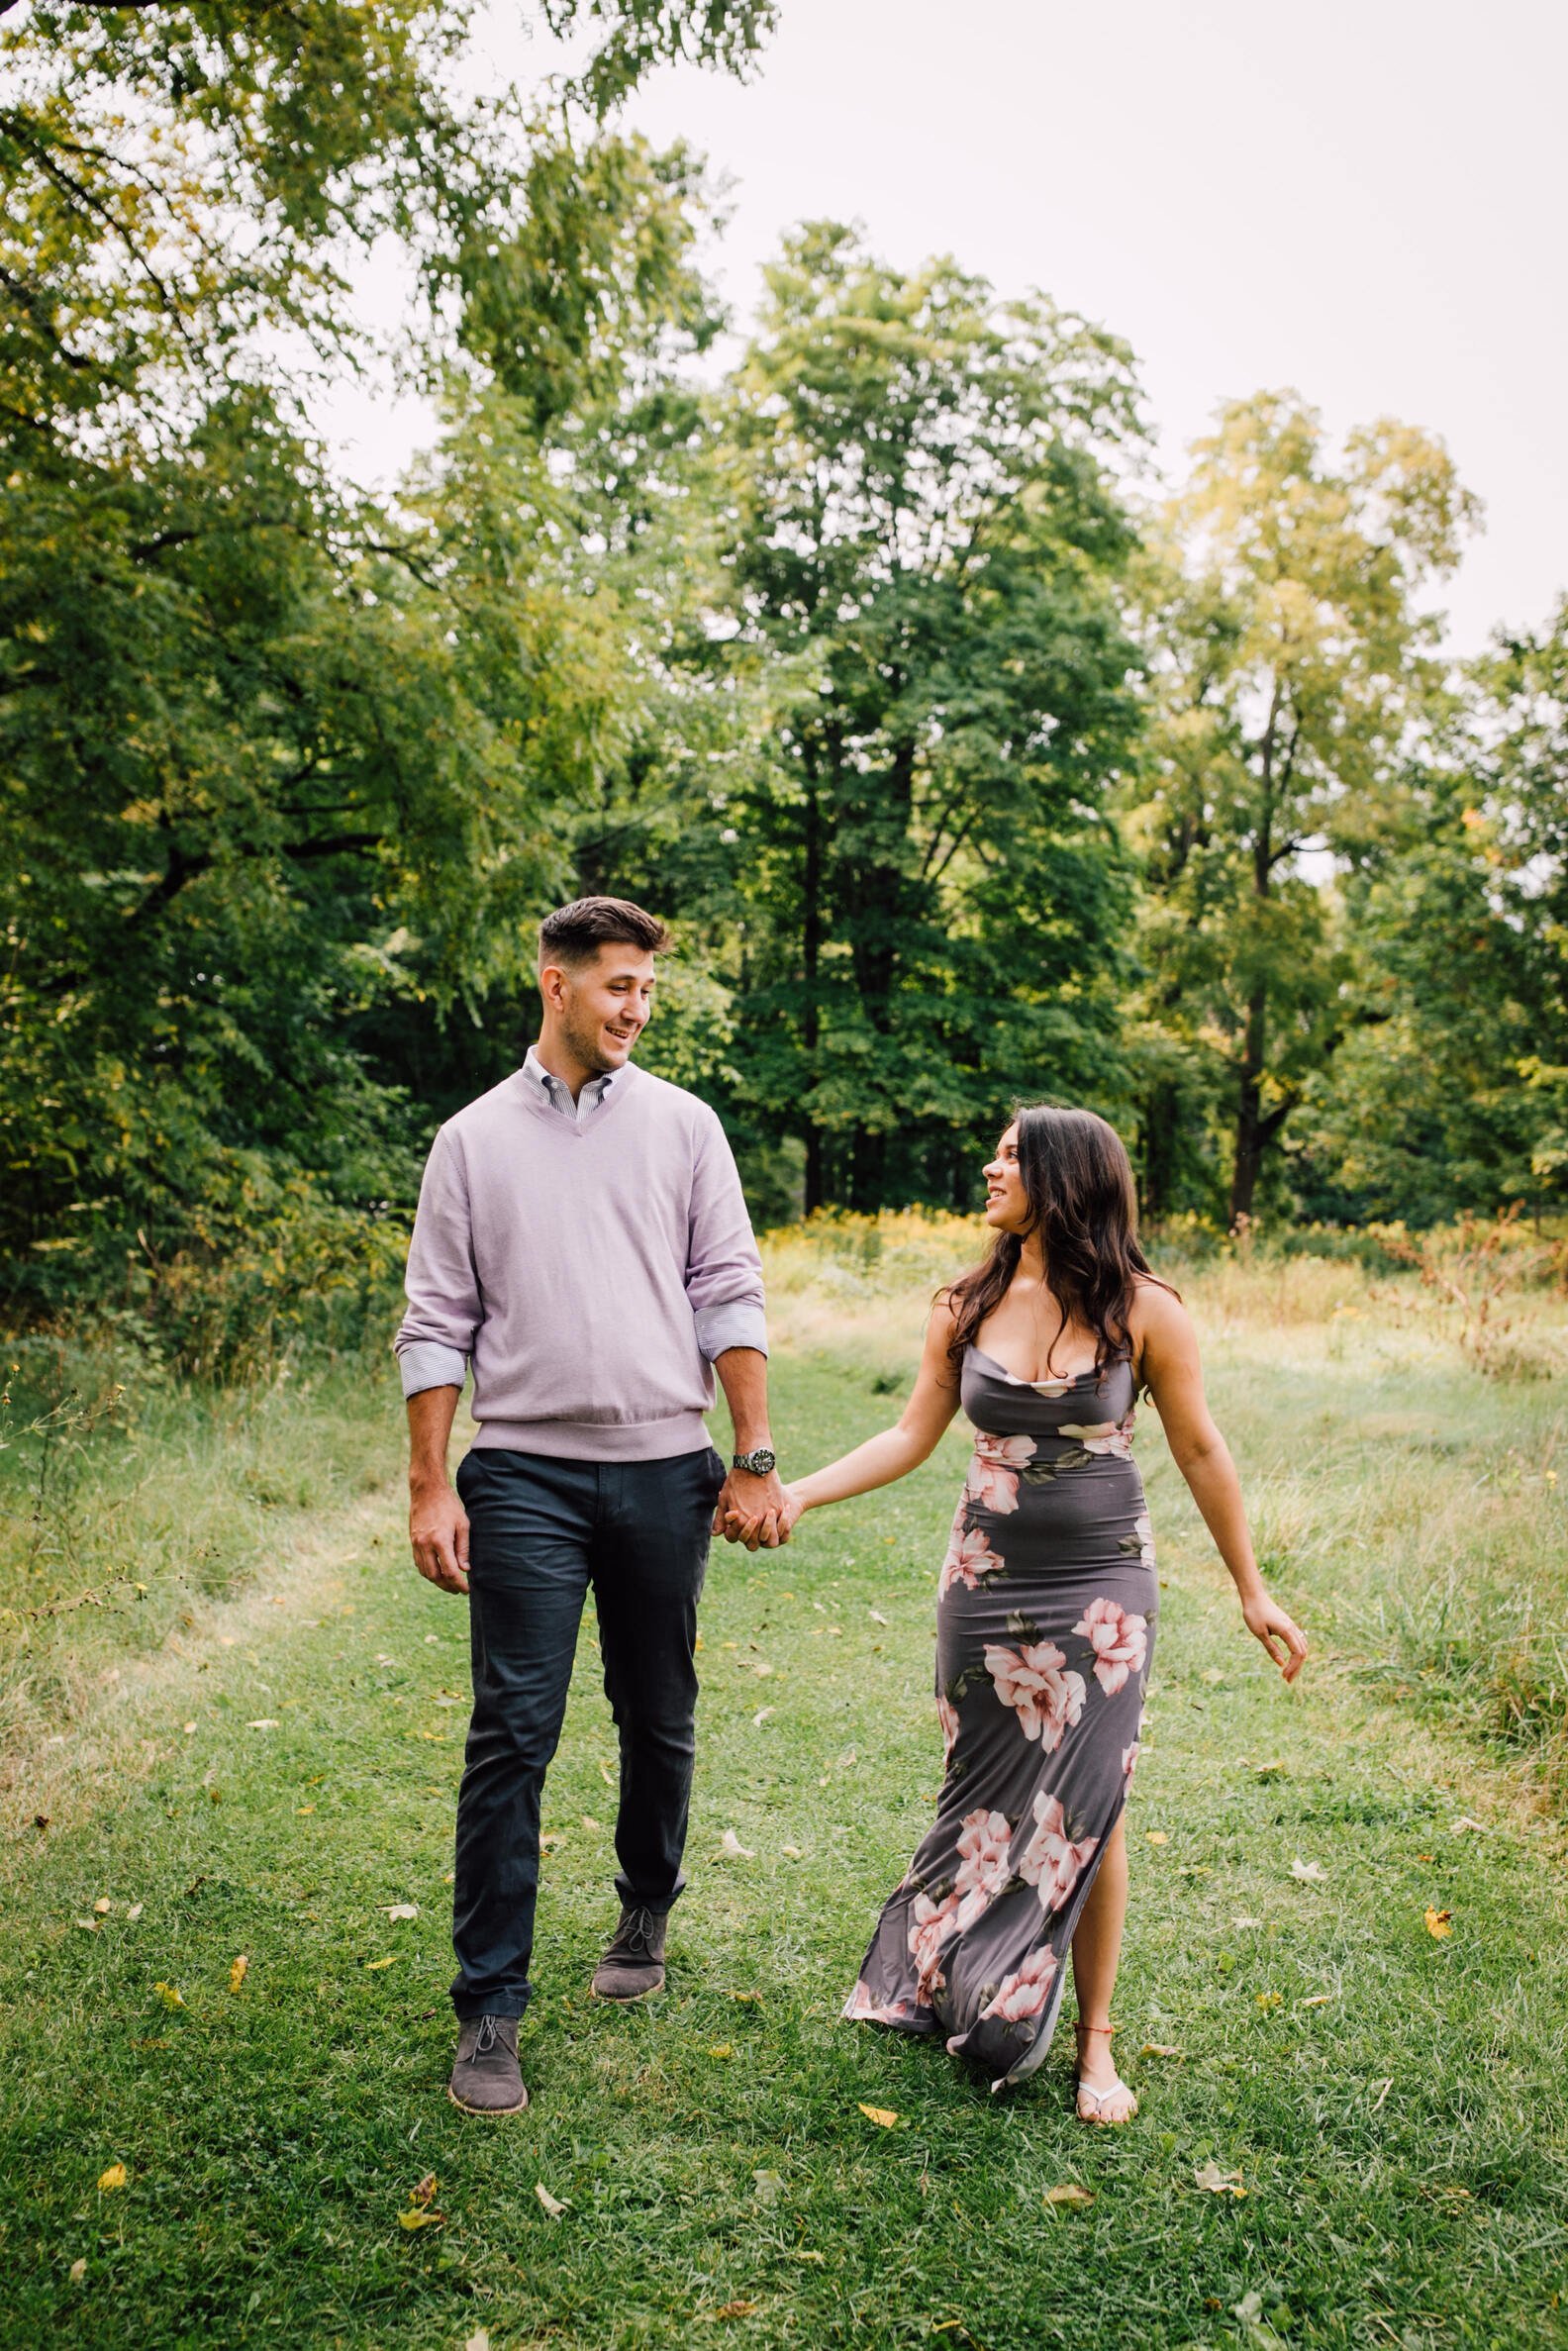  Engaged couple smile as they walk together through a grassy area at chittenango falls, syracuse, ny 